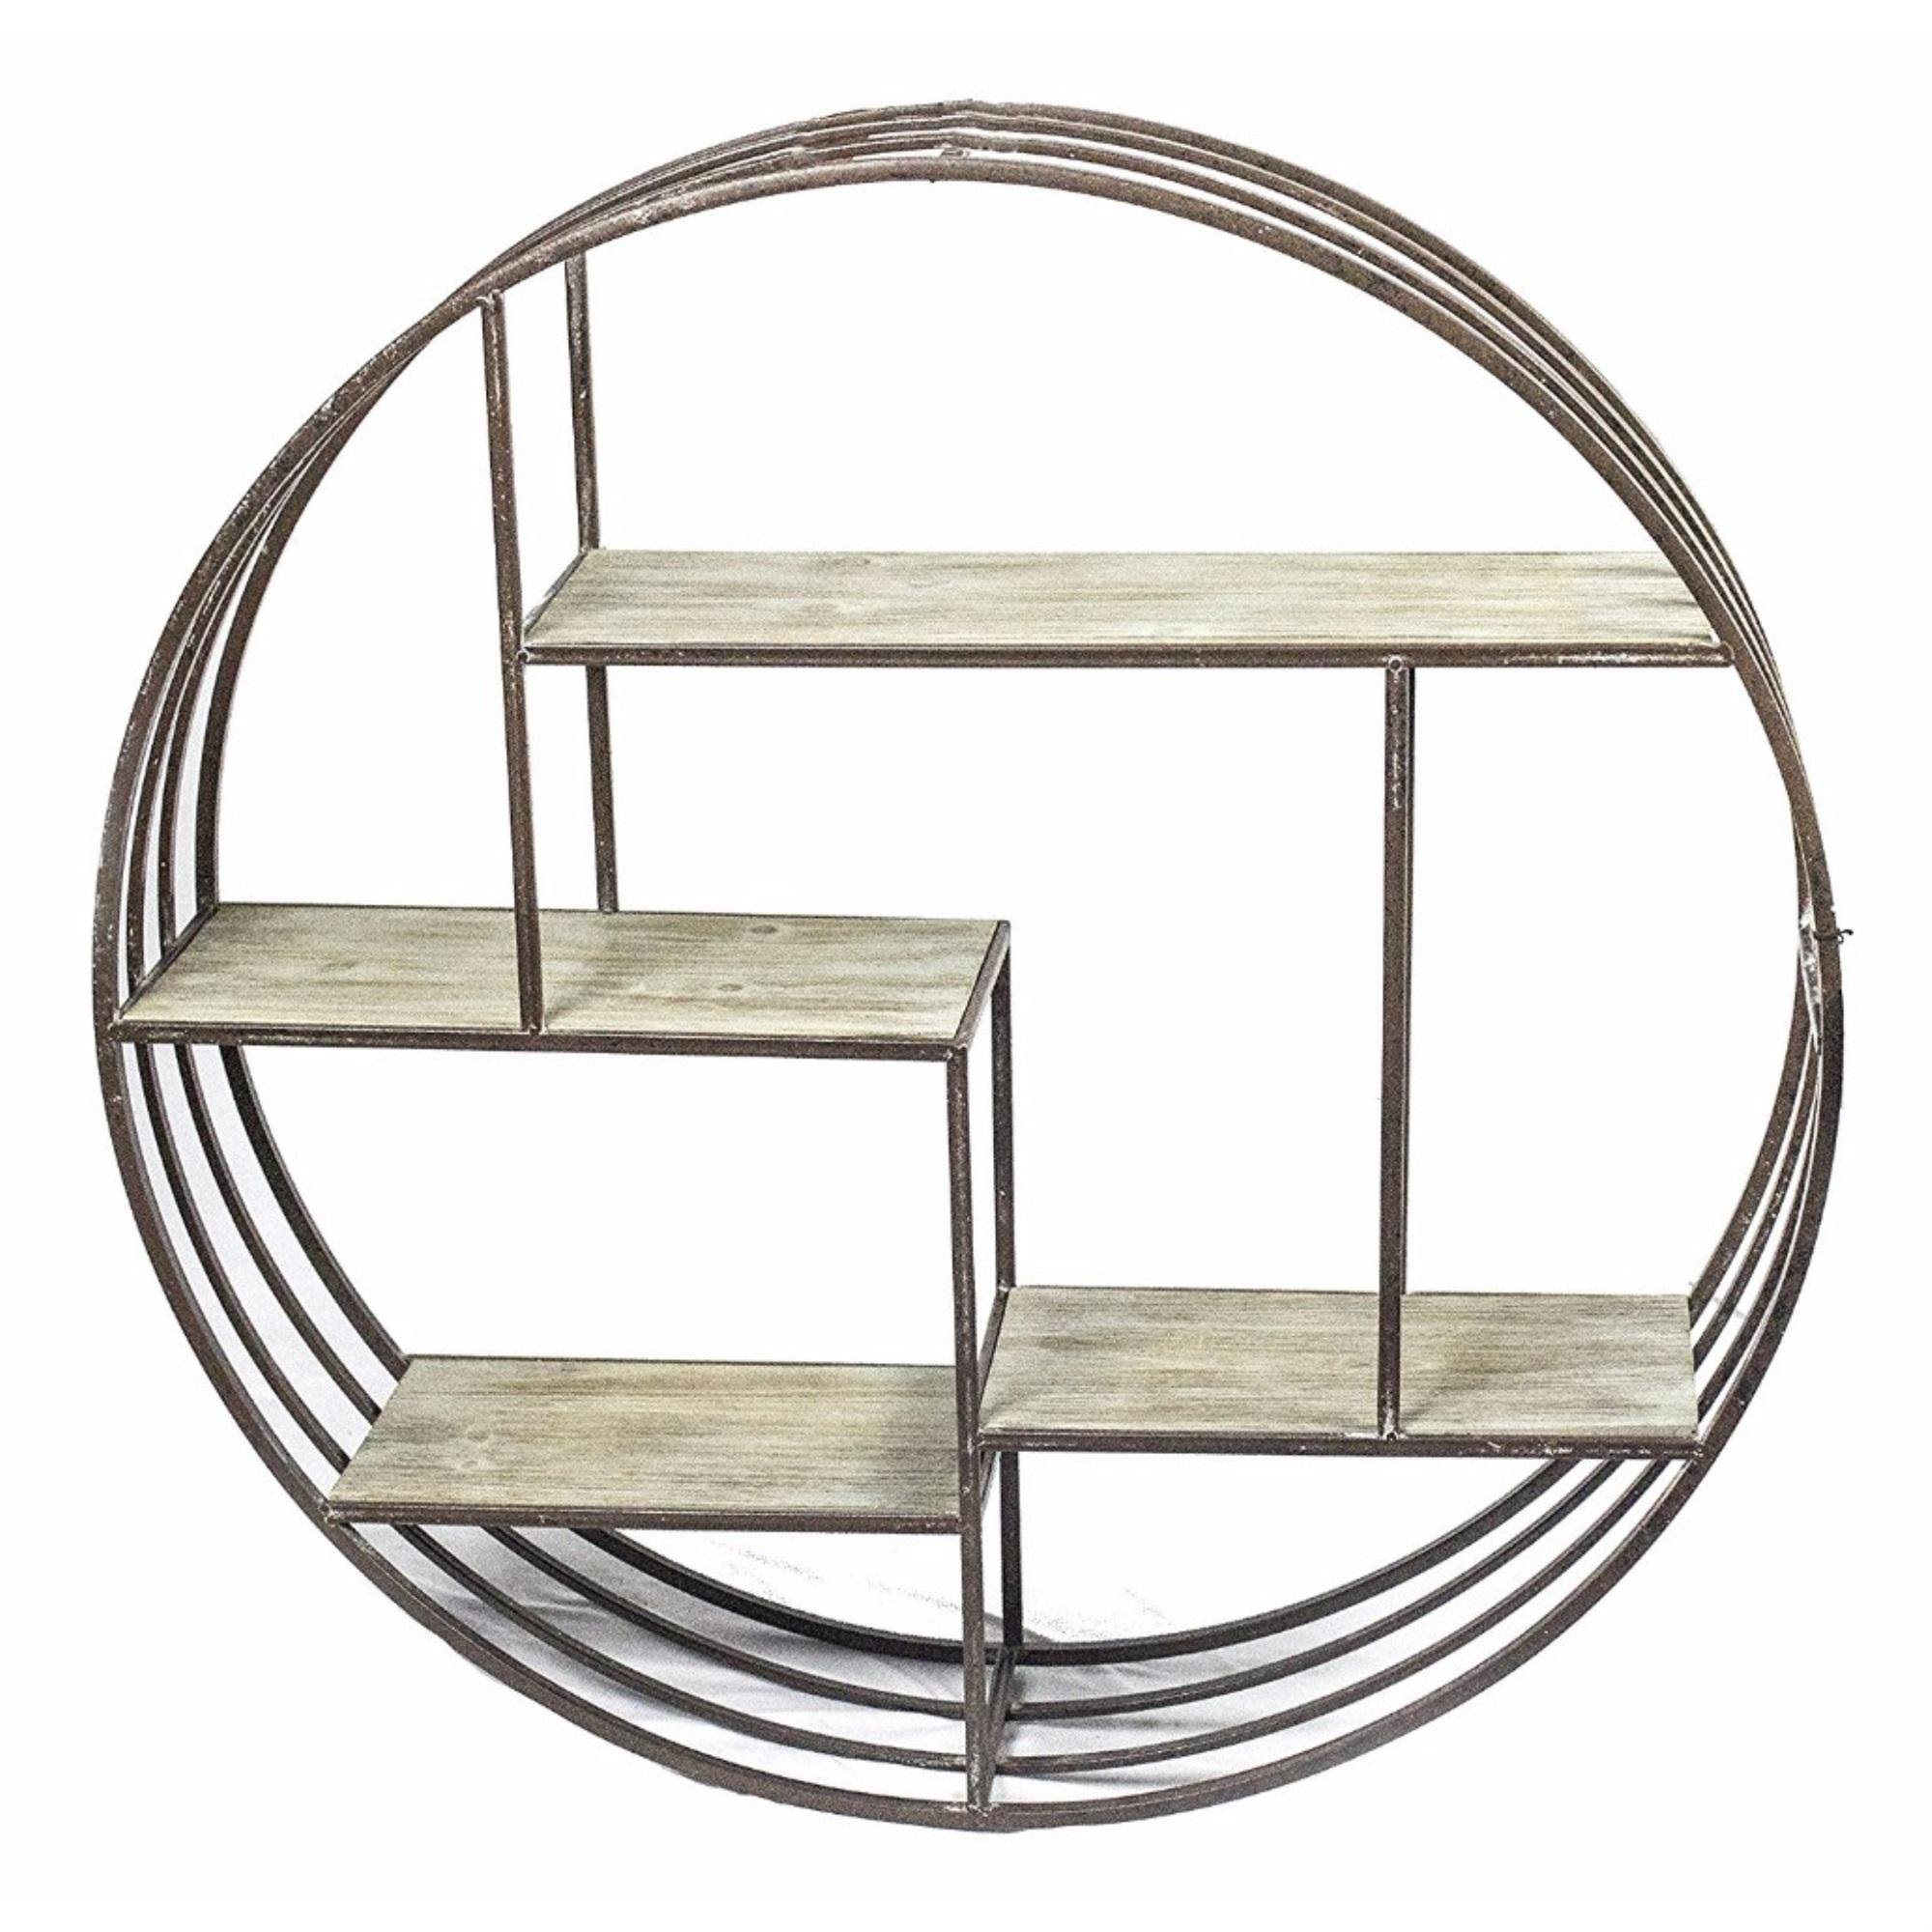 Round Metal Wall Shelf with Wooden Shelves Brown - WGL-1-s